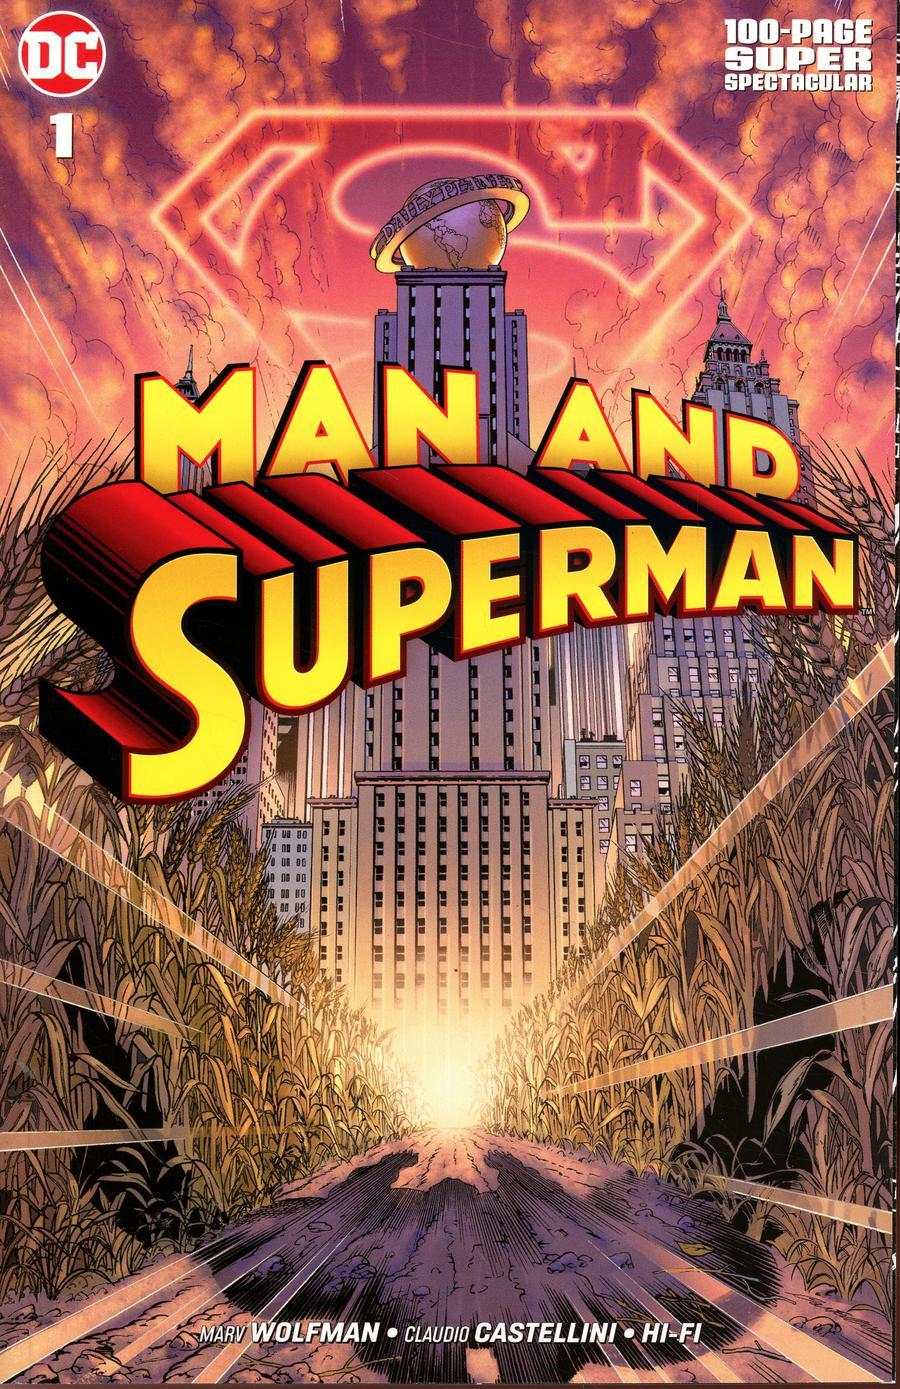 Man And Superman 100-Page Super-Spectacular Vol. 1 #1